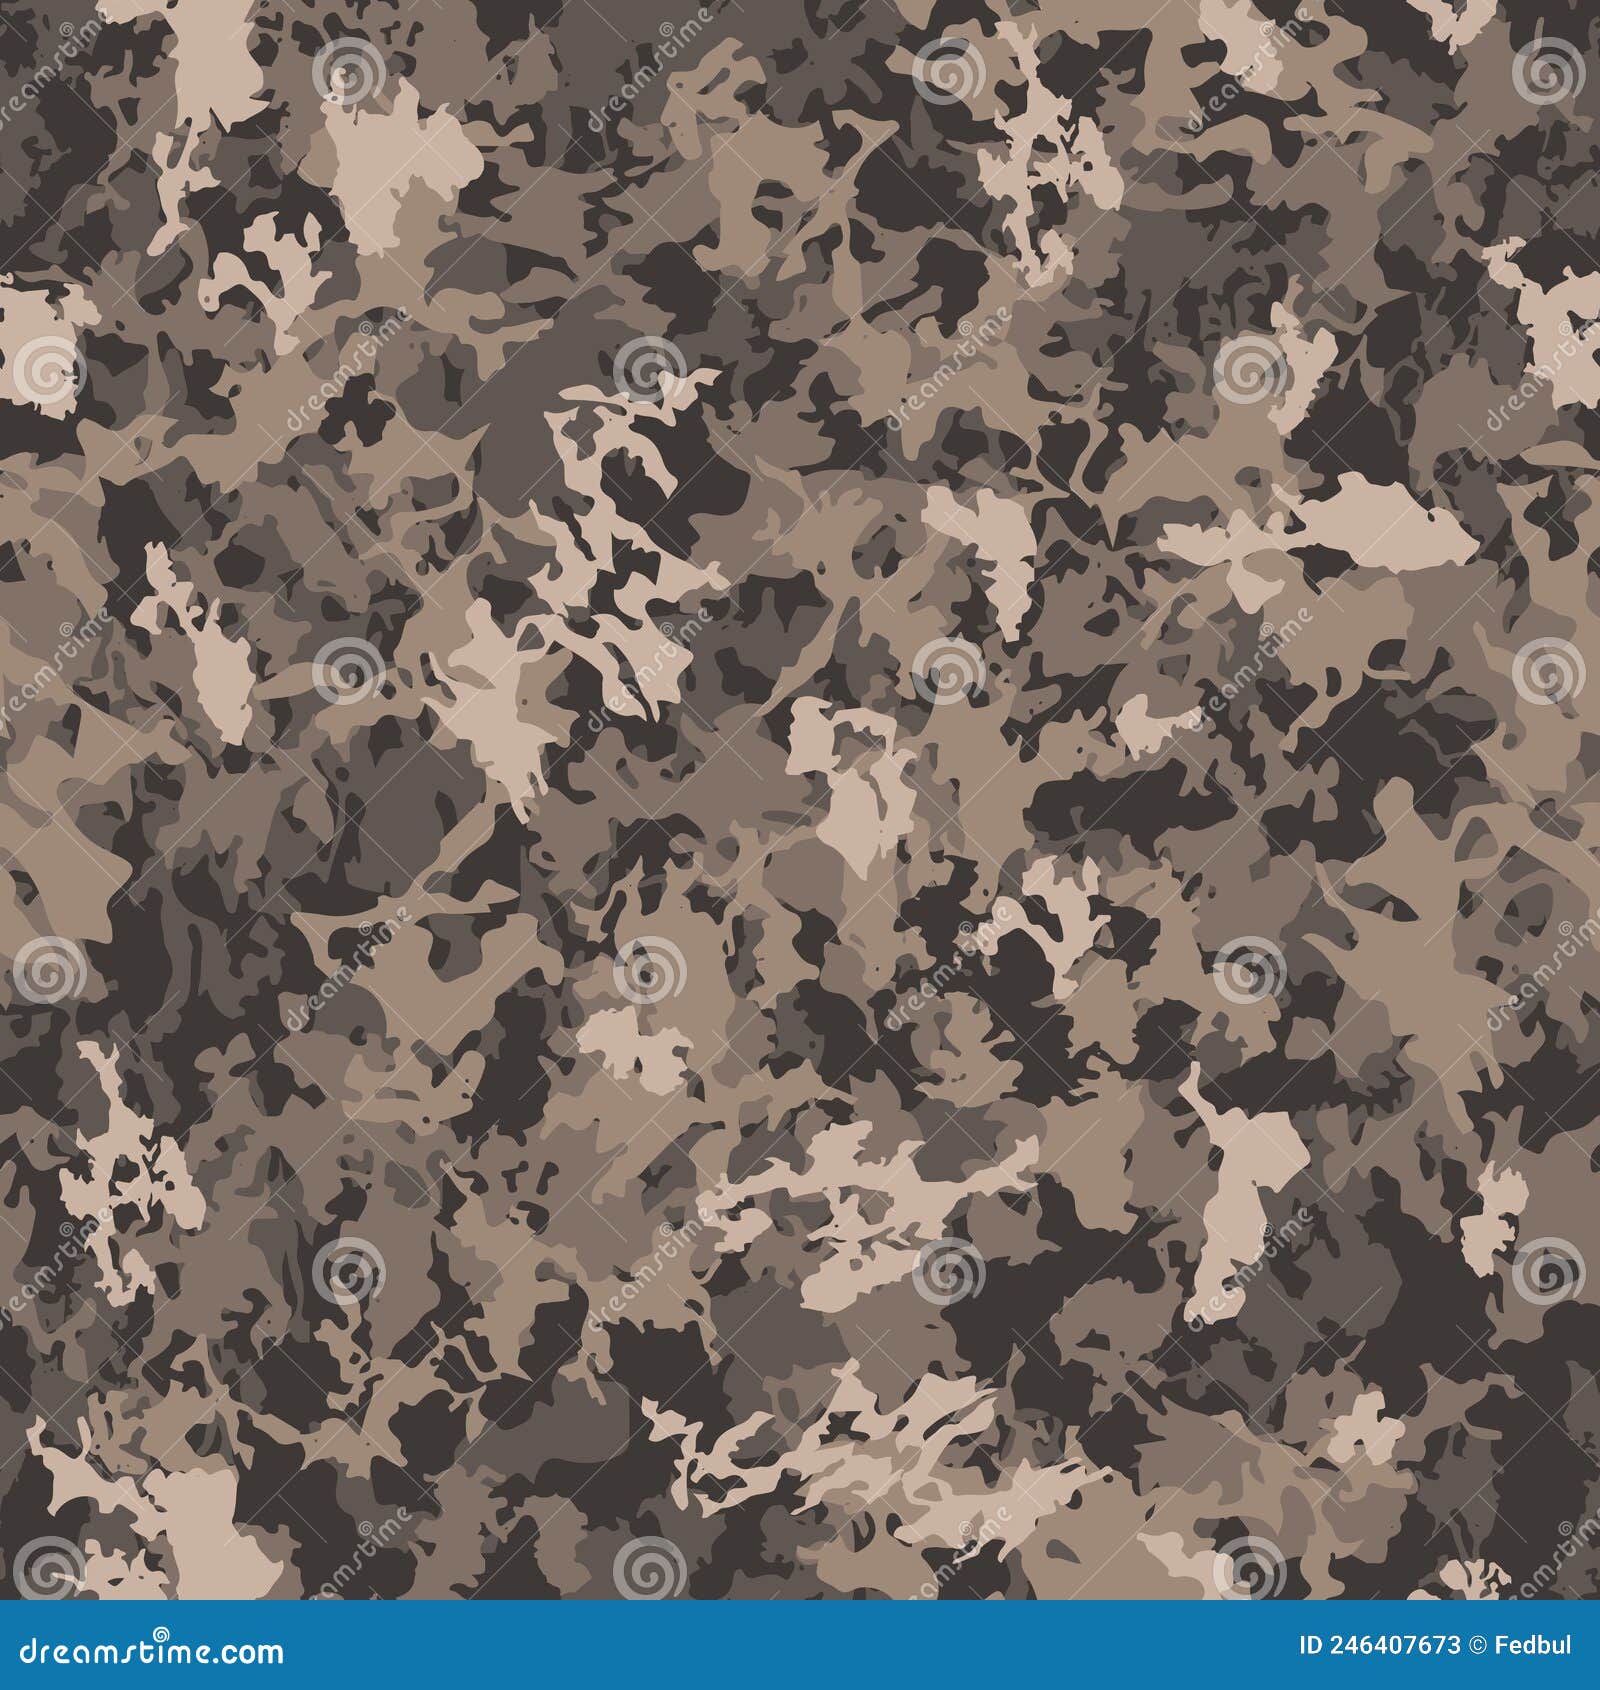 Brown and Tan Camo Abstract Nature Camouflage Design Pattern